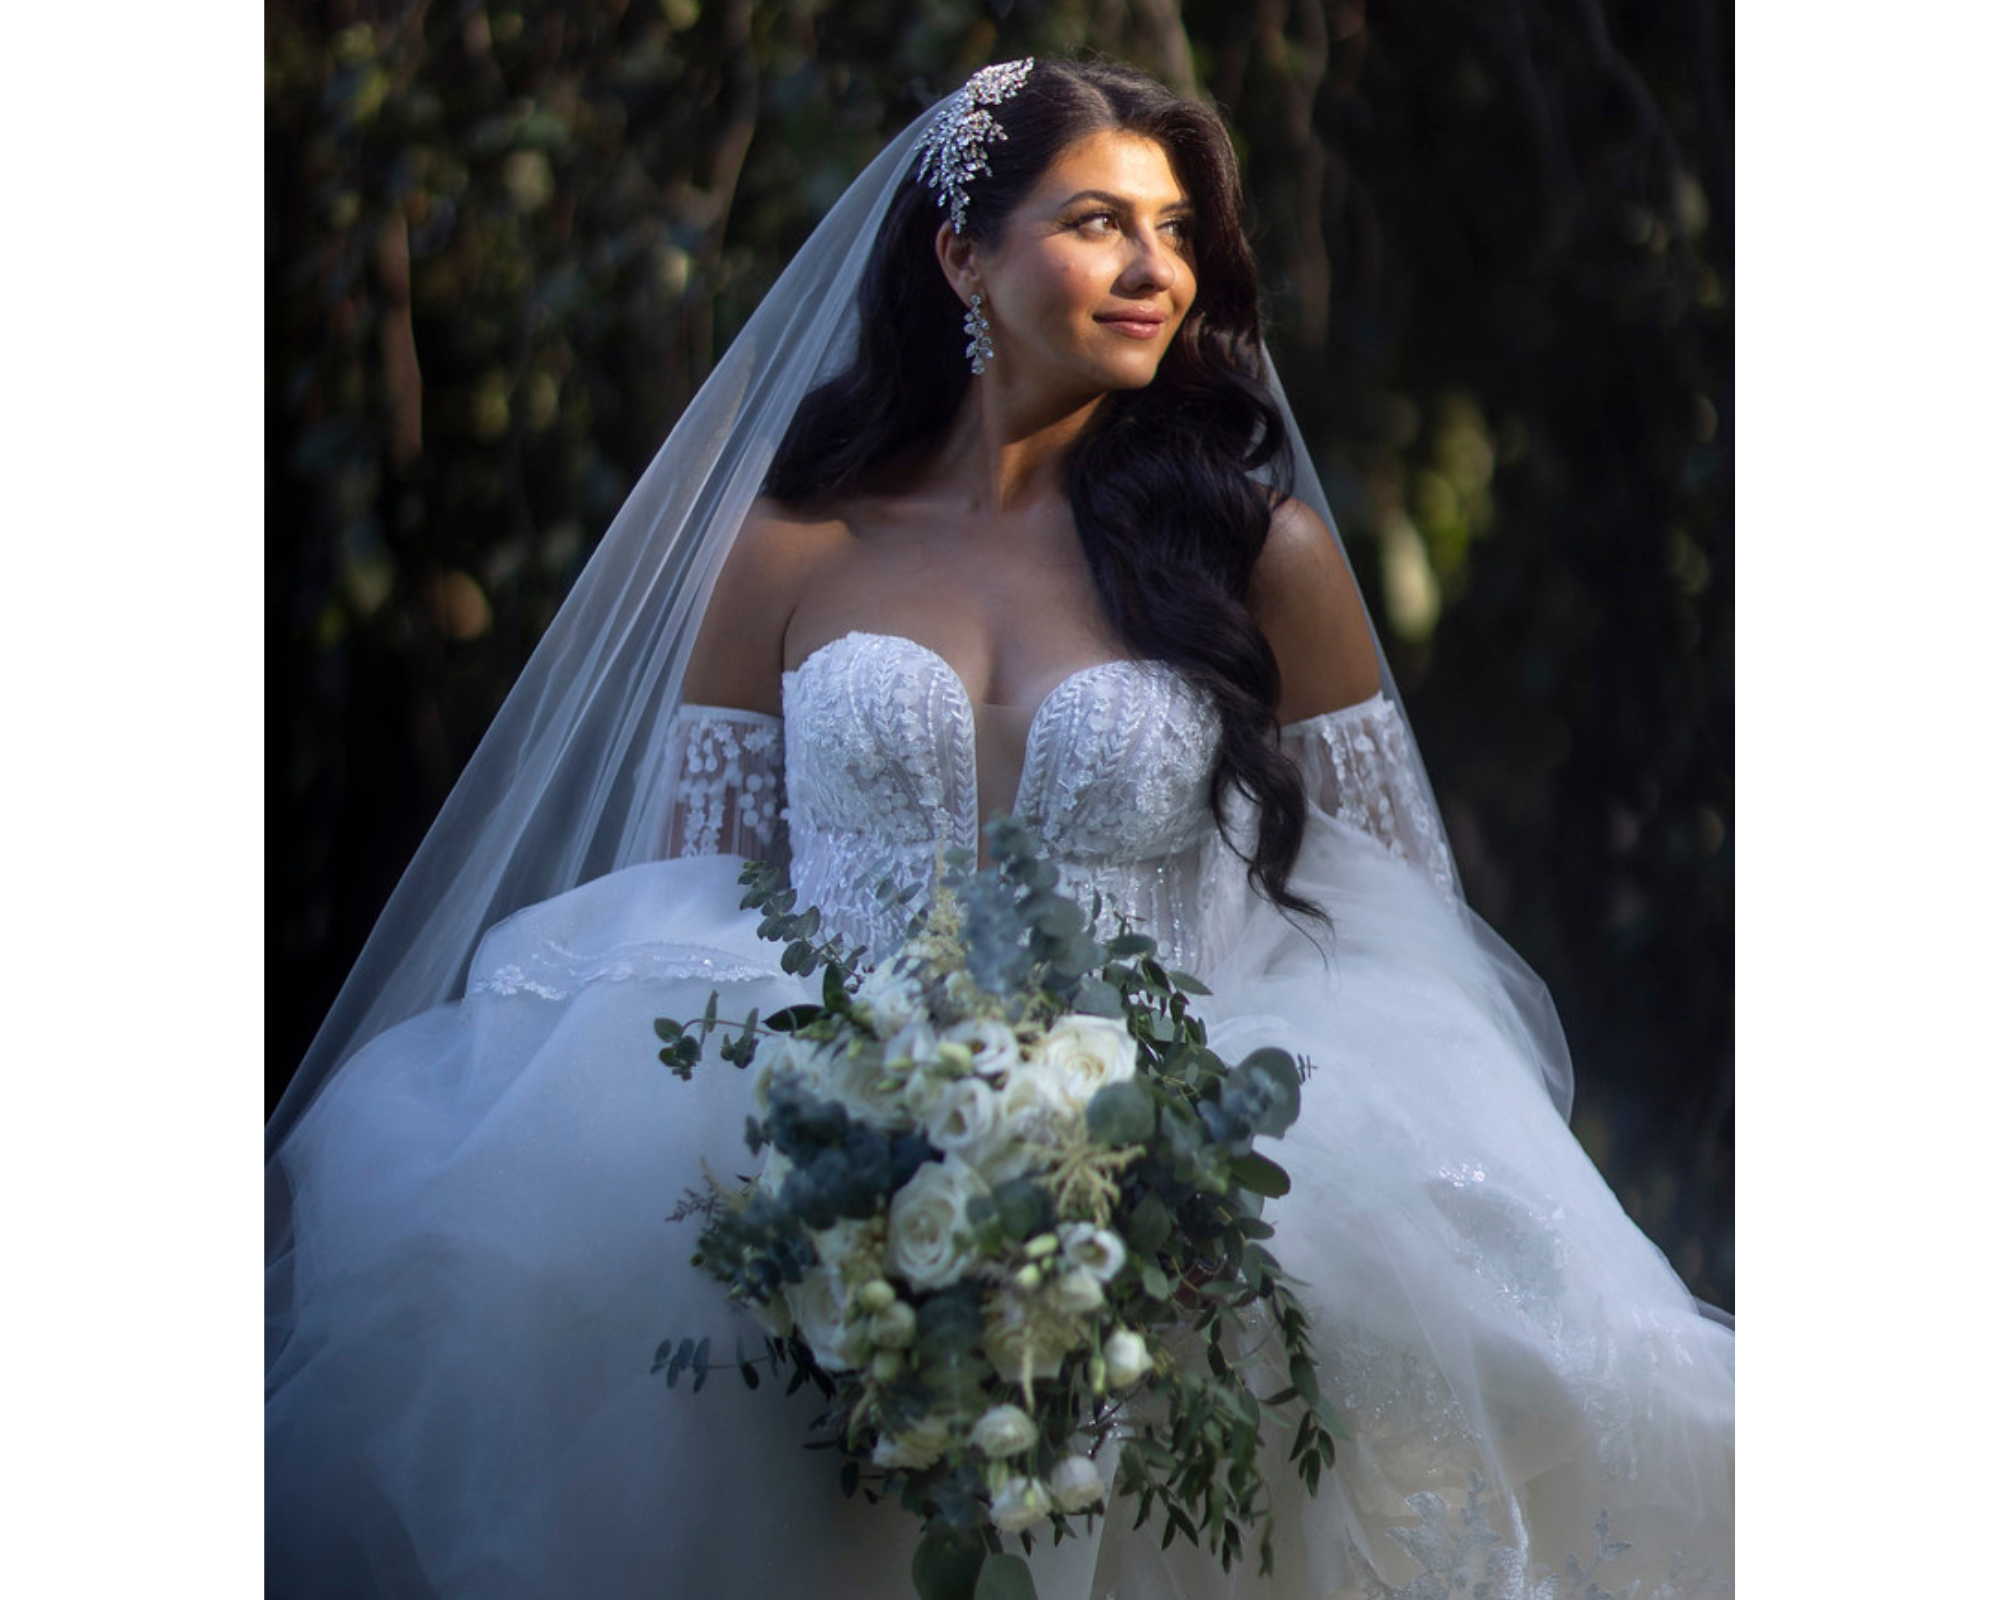 Beautiful fairytale bride Noelle wedding her stunning lace gown and Swarovski crystal bridal comb and jewelry.